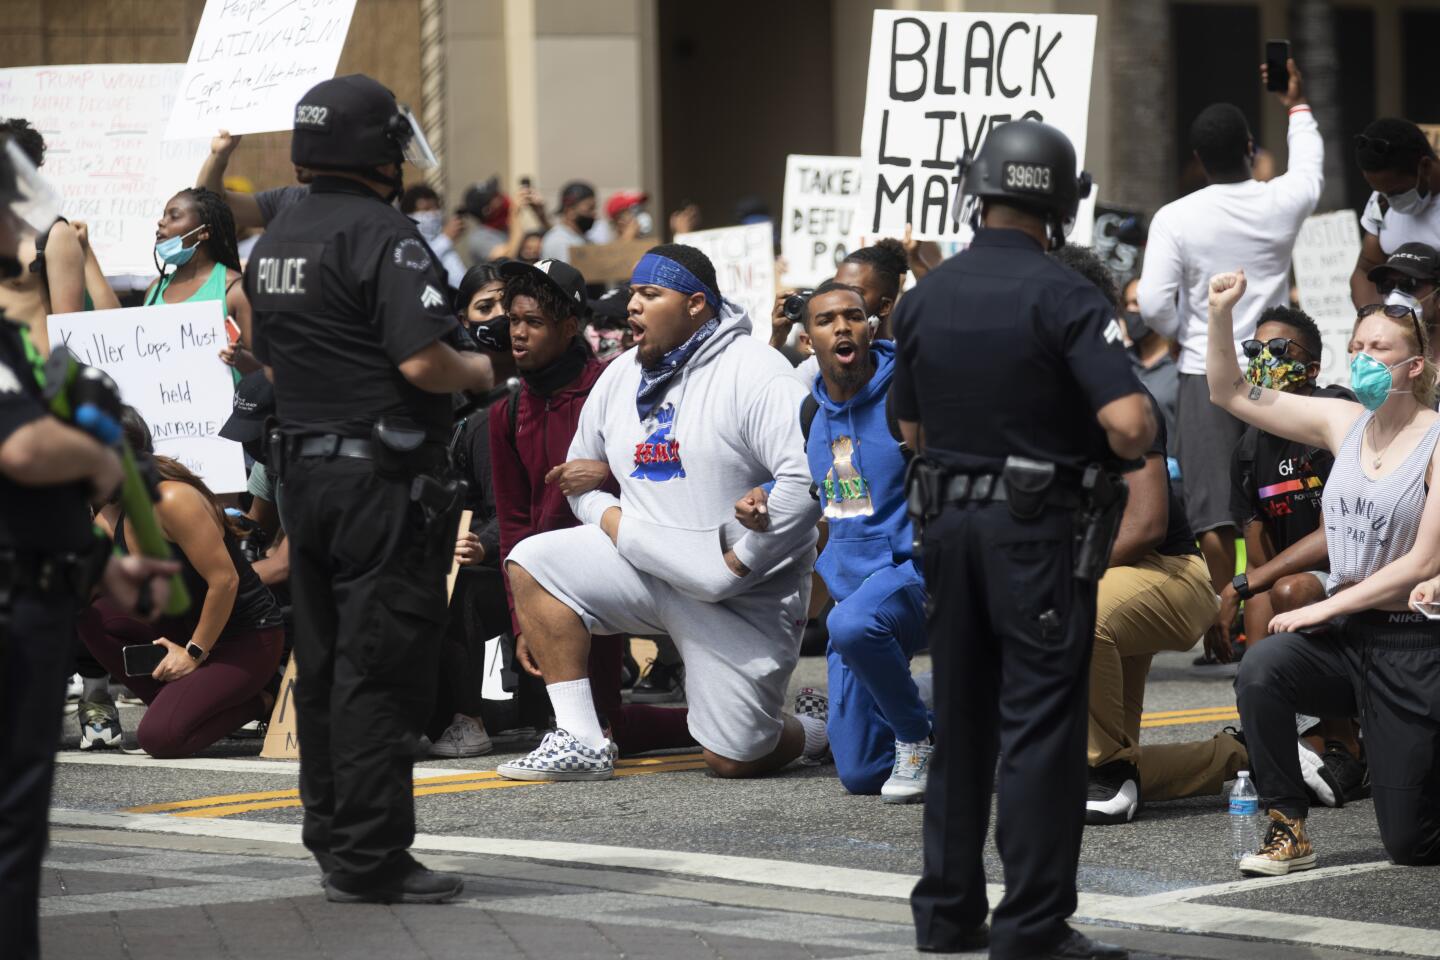 Demonstrators take a knee during protests in Hollywood on Tuesday.